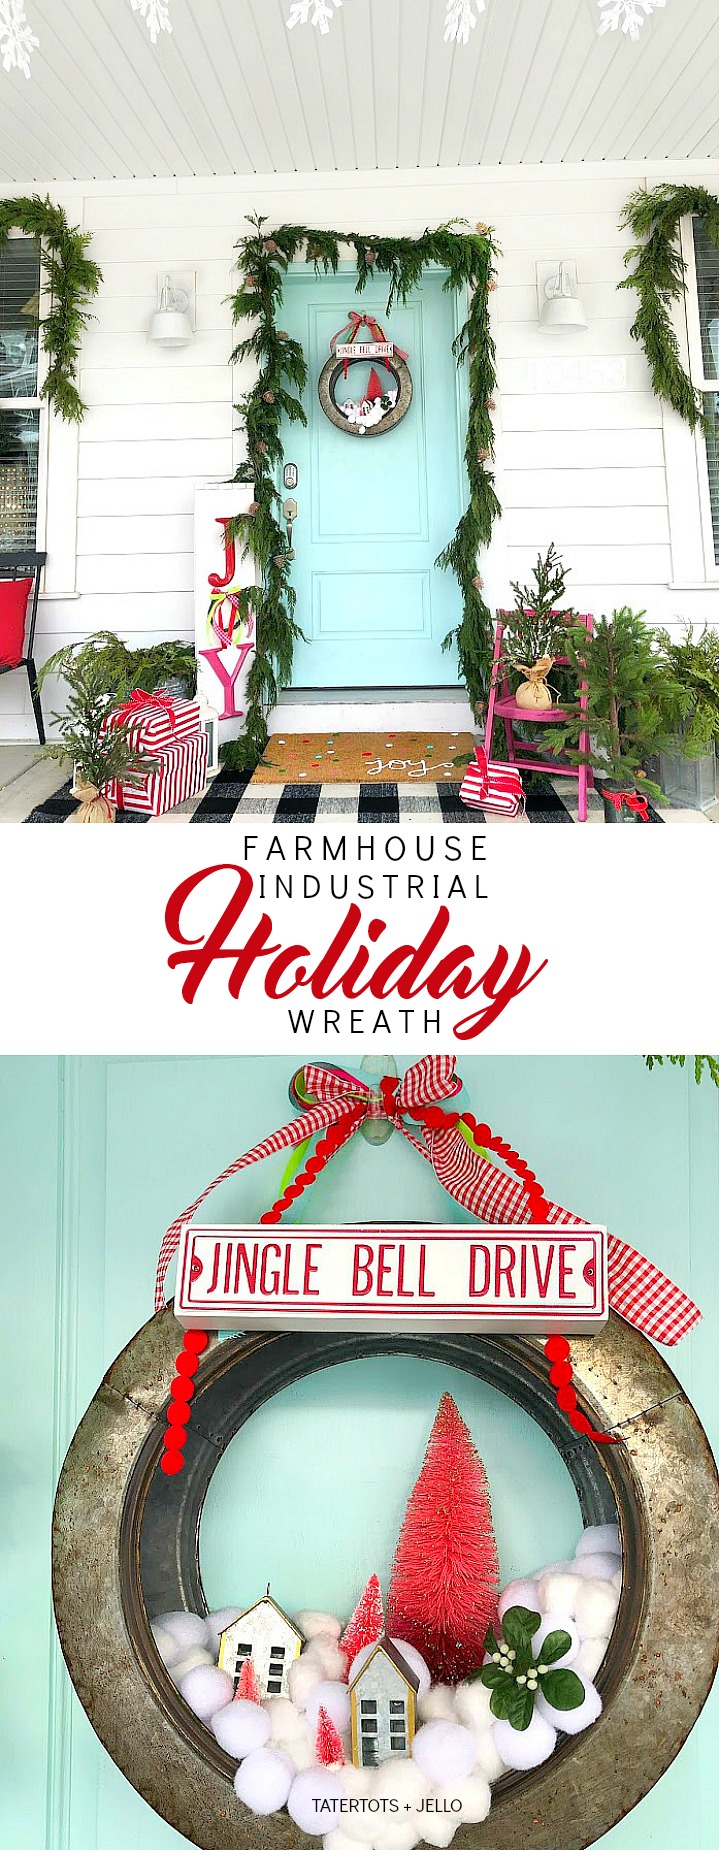 Farmhouse Industrial Snowball Wreath. Make a whimsical snowball wreath with a modern galvanized base, cotton balls, little houses and trees. 